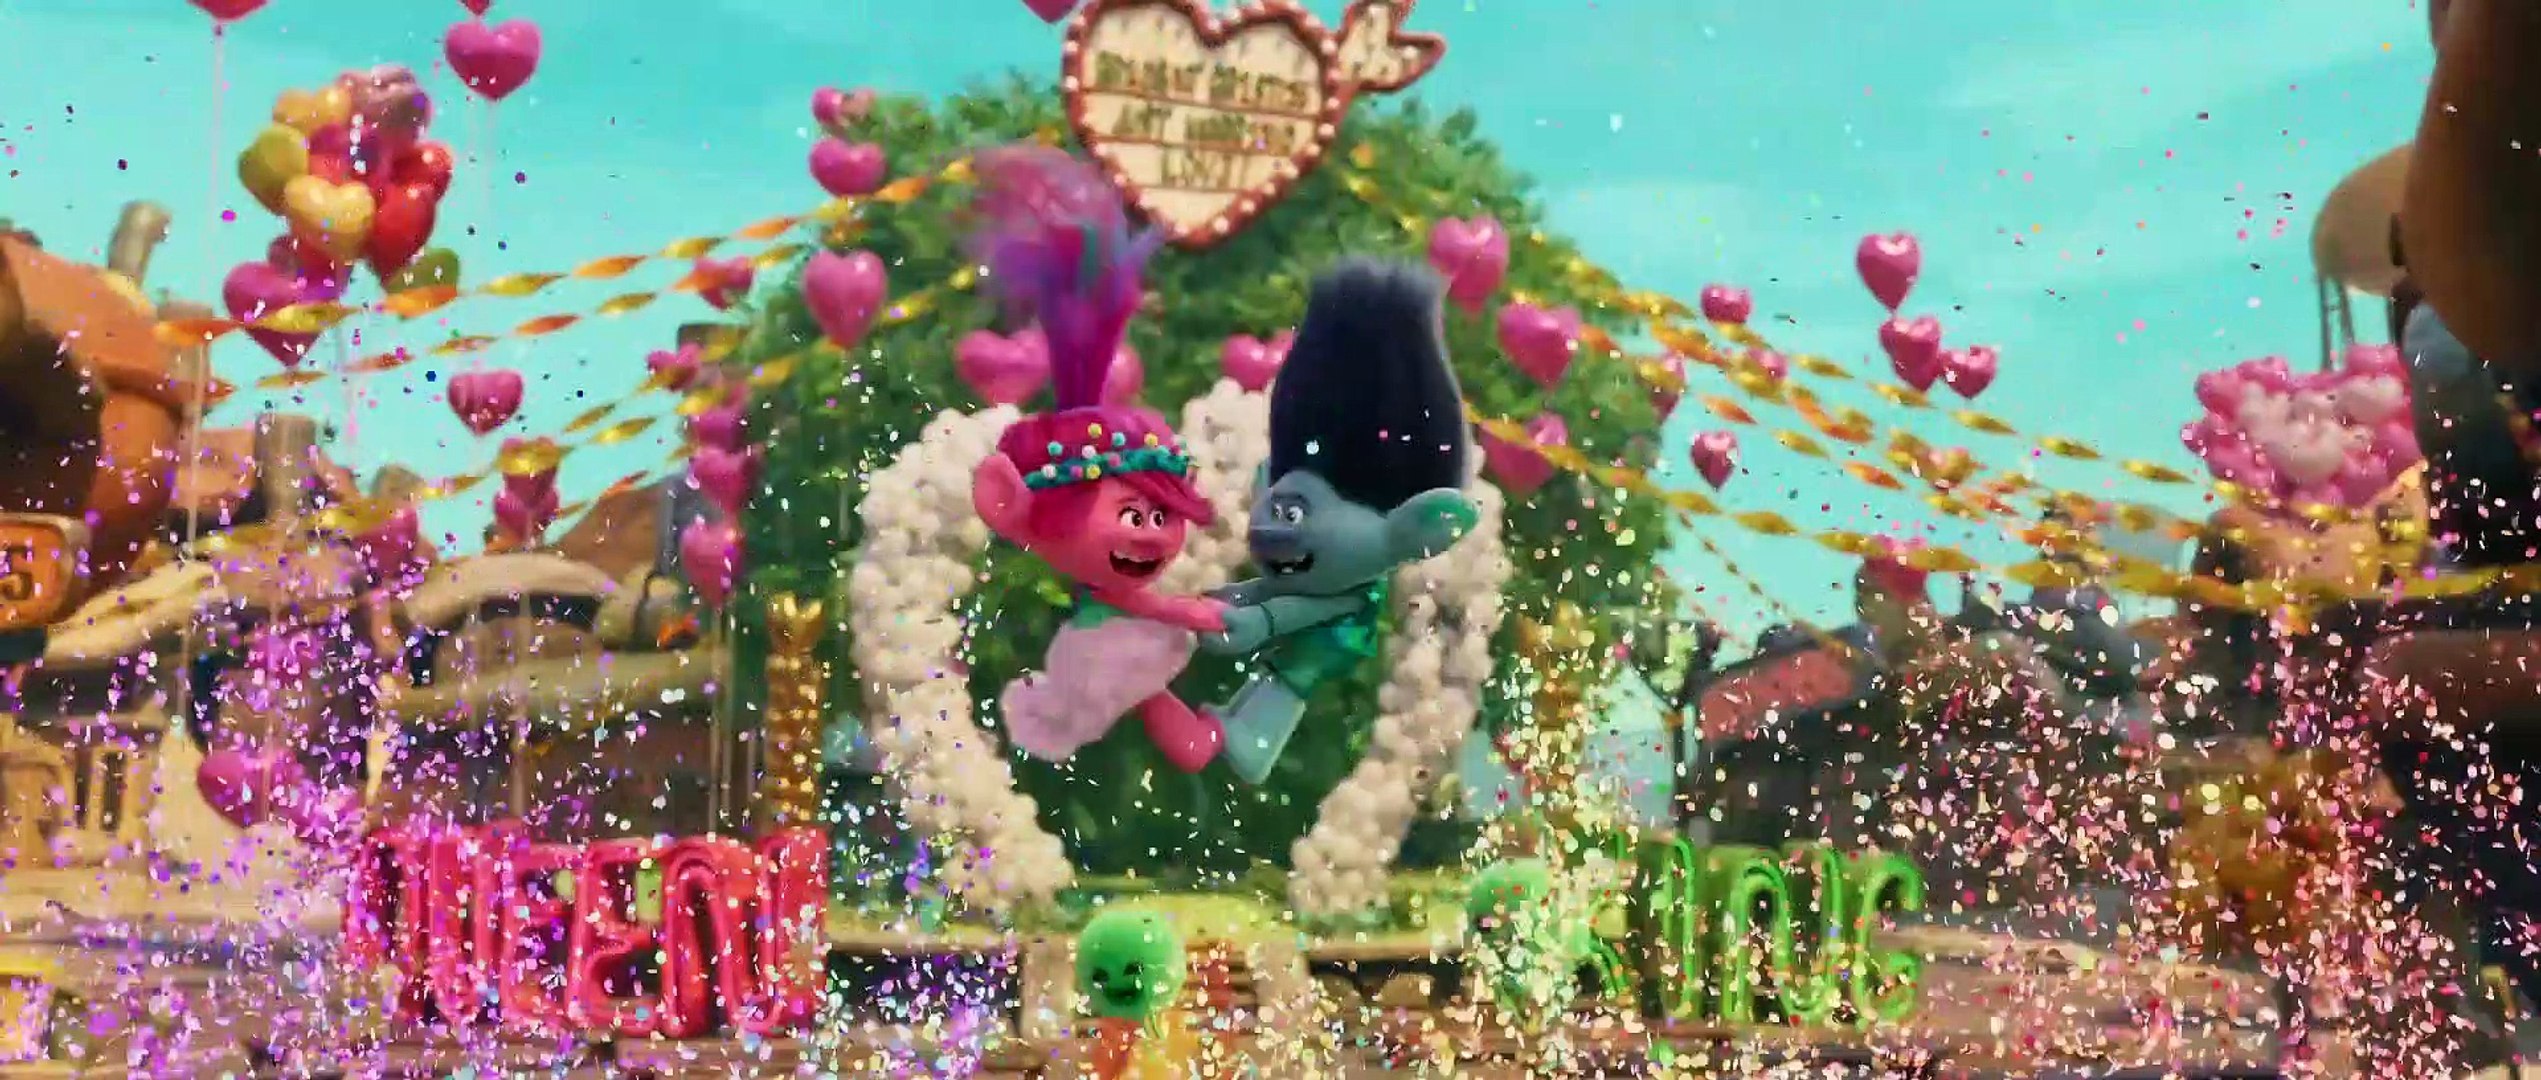 Trolls 3 Release Date, Trailer, Cast, Plot and More About The New Trolls  Movie